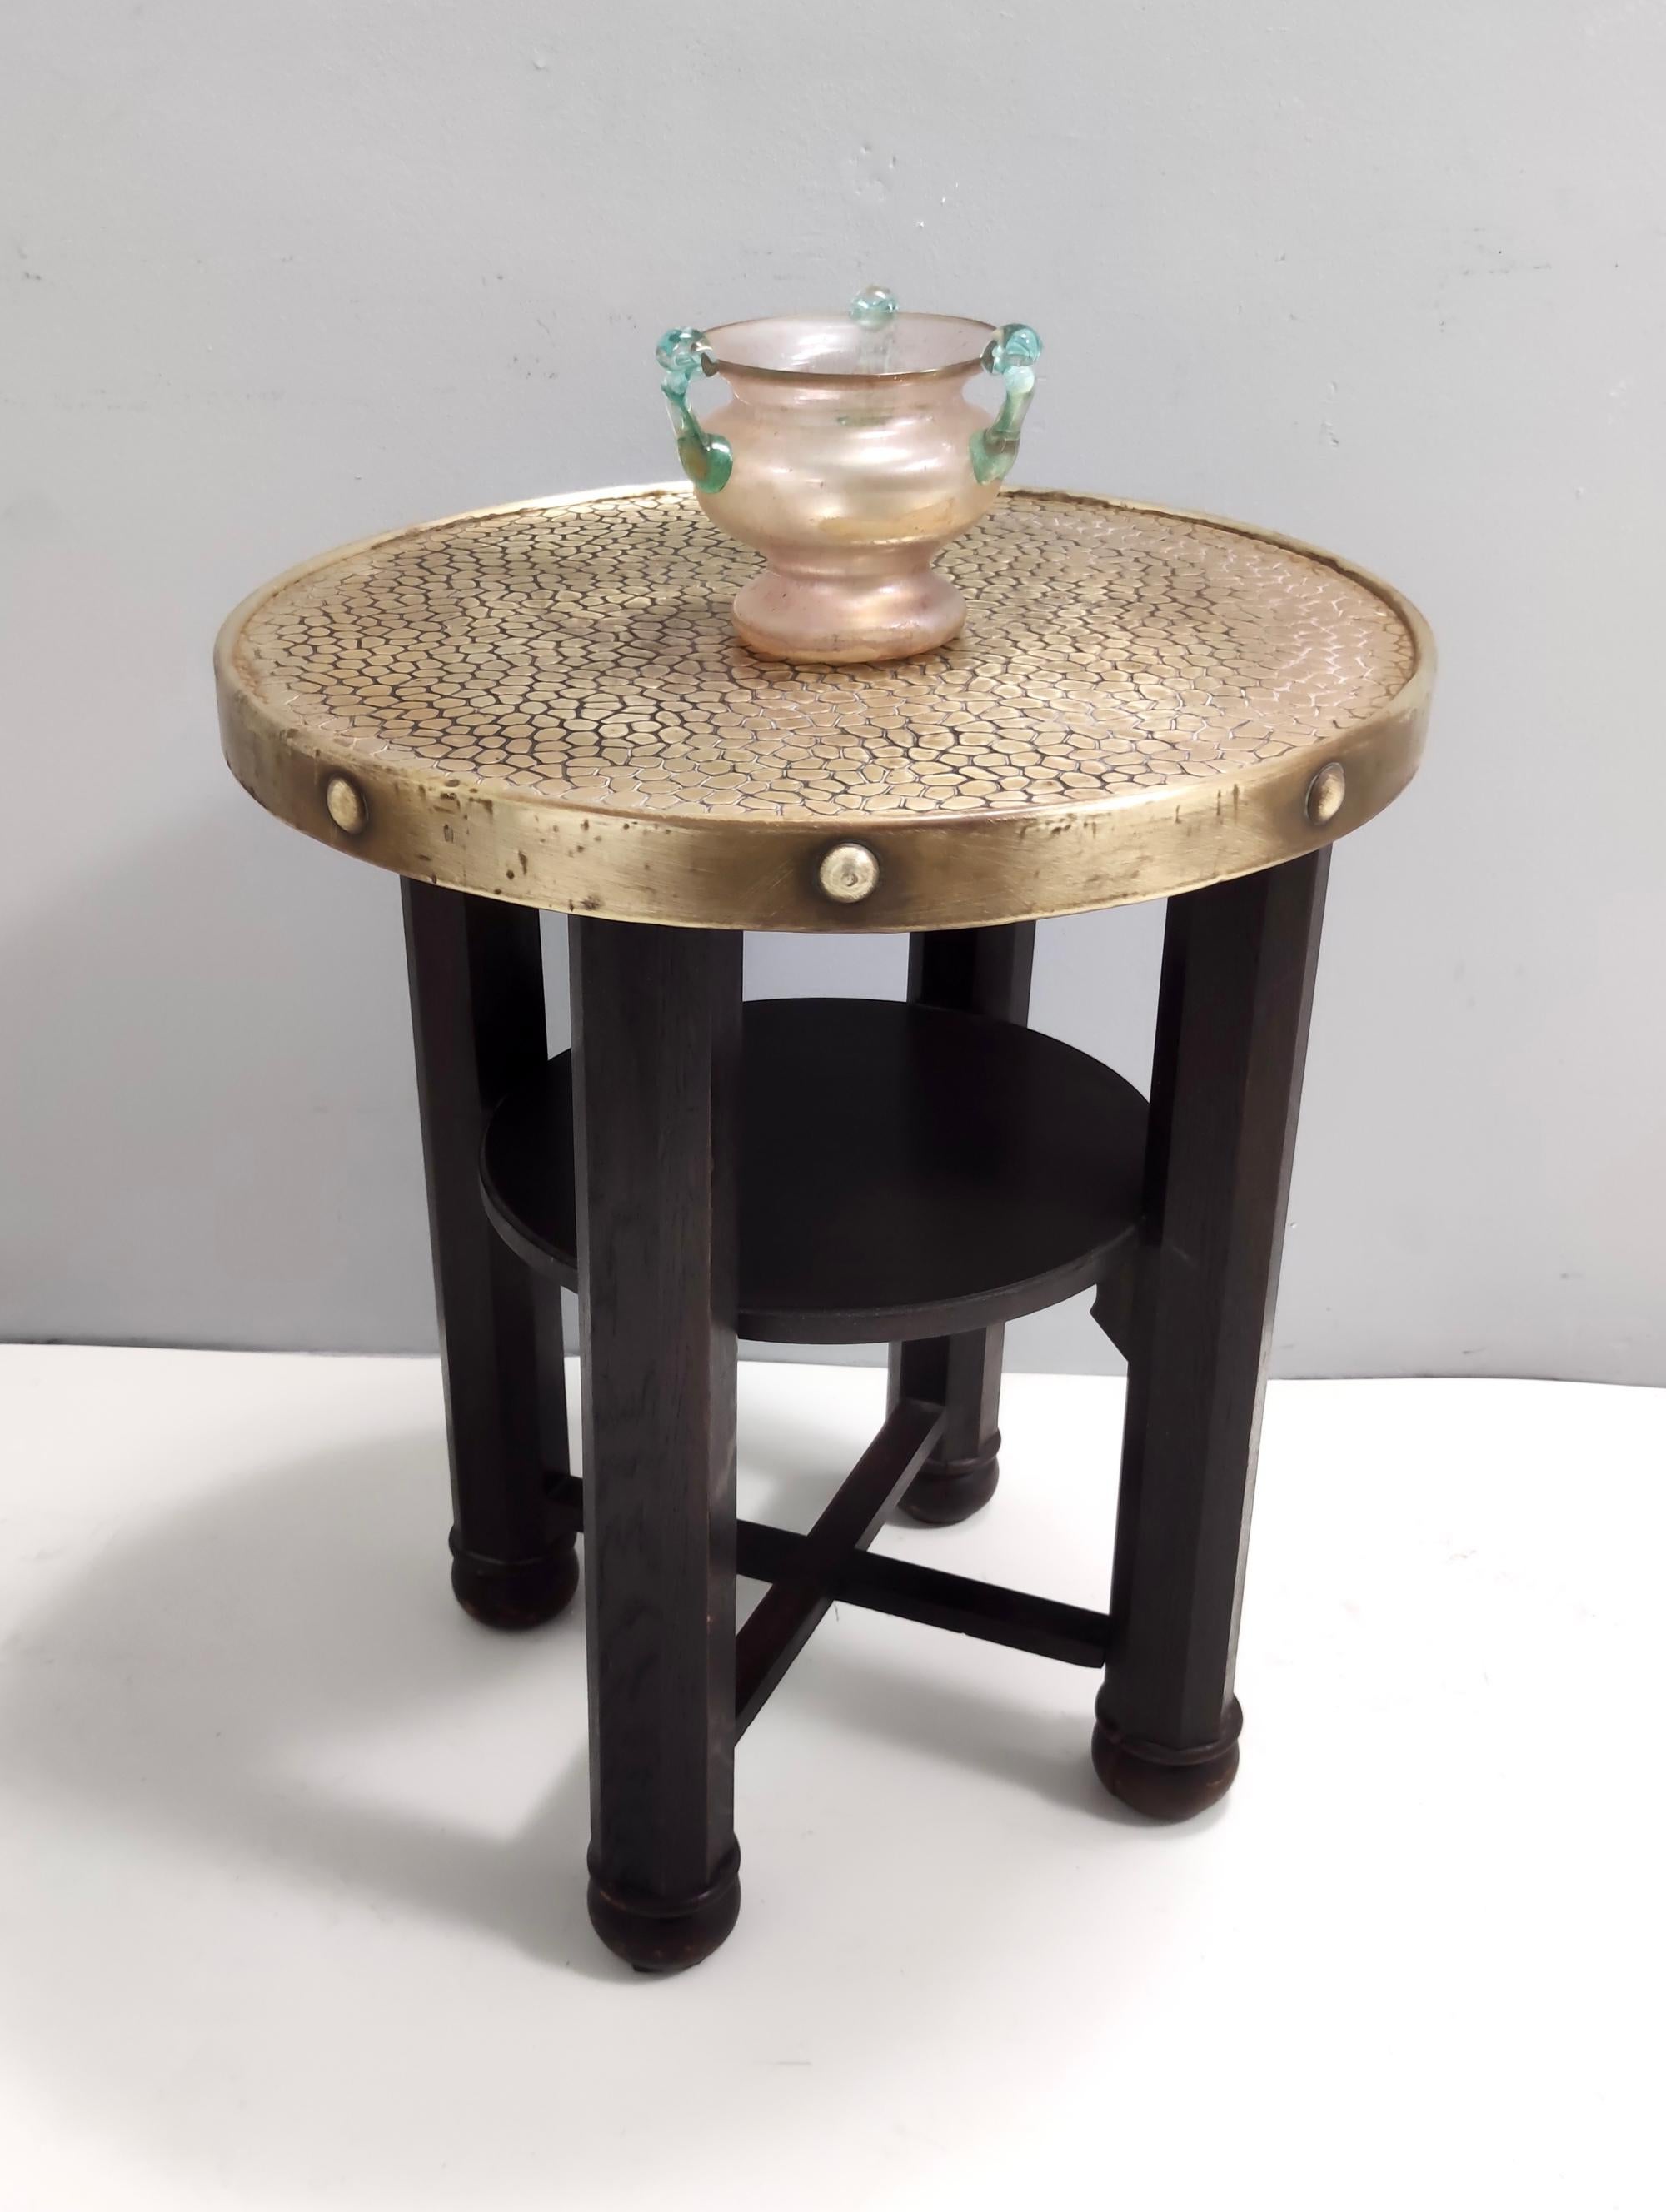 Made in Austria, 1920s. 
This coffee table features a durmast frame with a brass top and a shelf.
This is a vintage piece, therefore it might show slight traces of use, but it can be considered as in very good original condition. 
 
Measures: